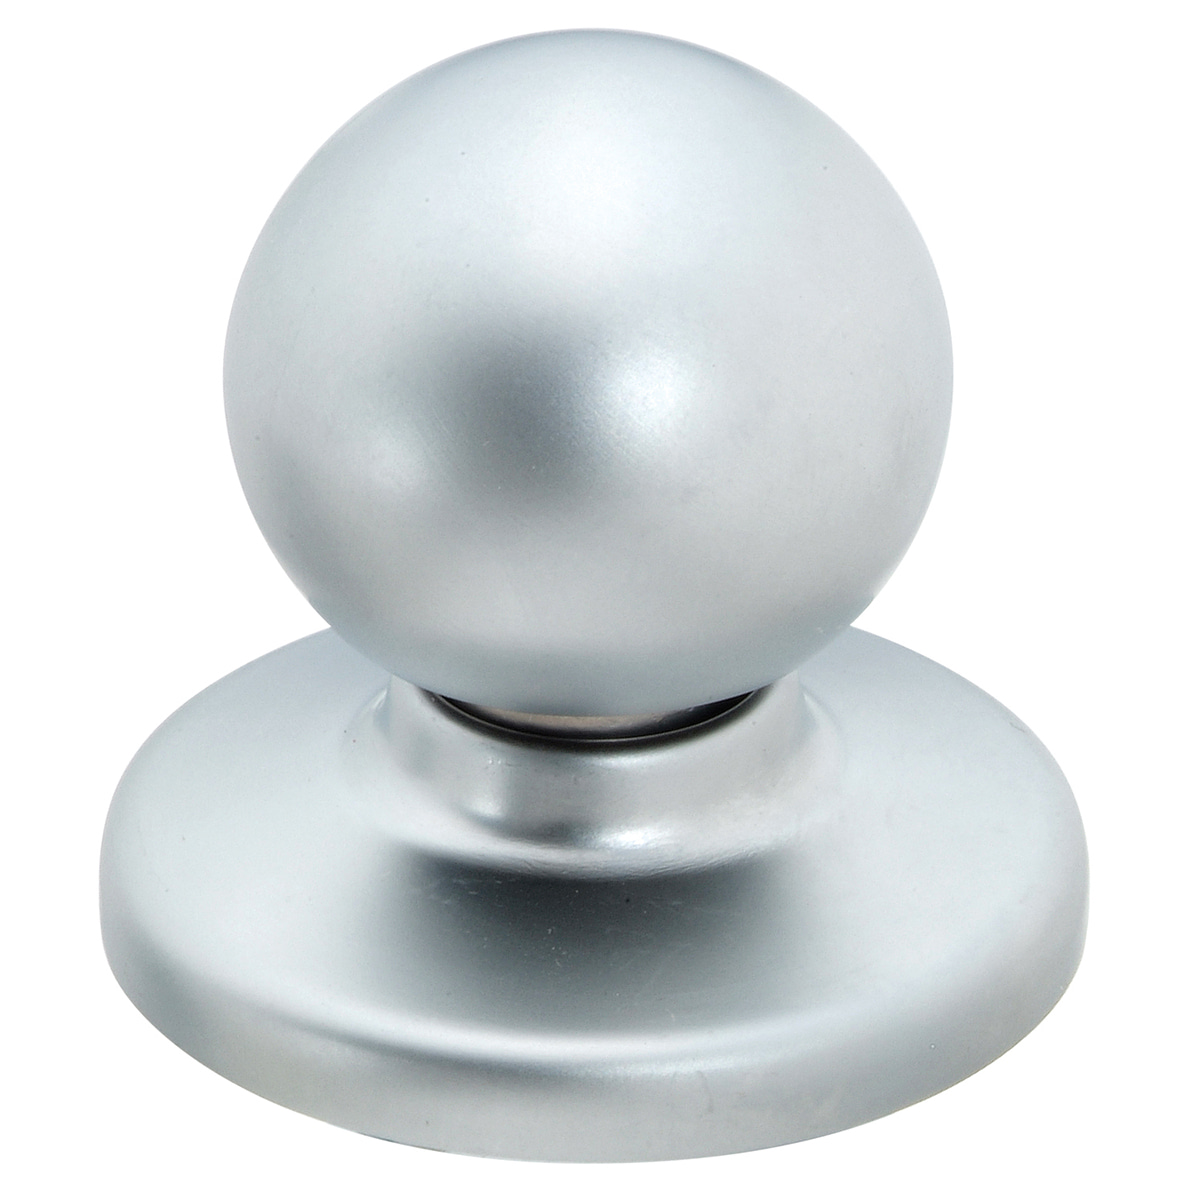 Cabinet Knobs - Pedestal Knob with Removable Backplate - Pedestal Knob with Removable Backplate - Satin Chrome